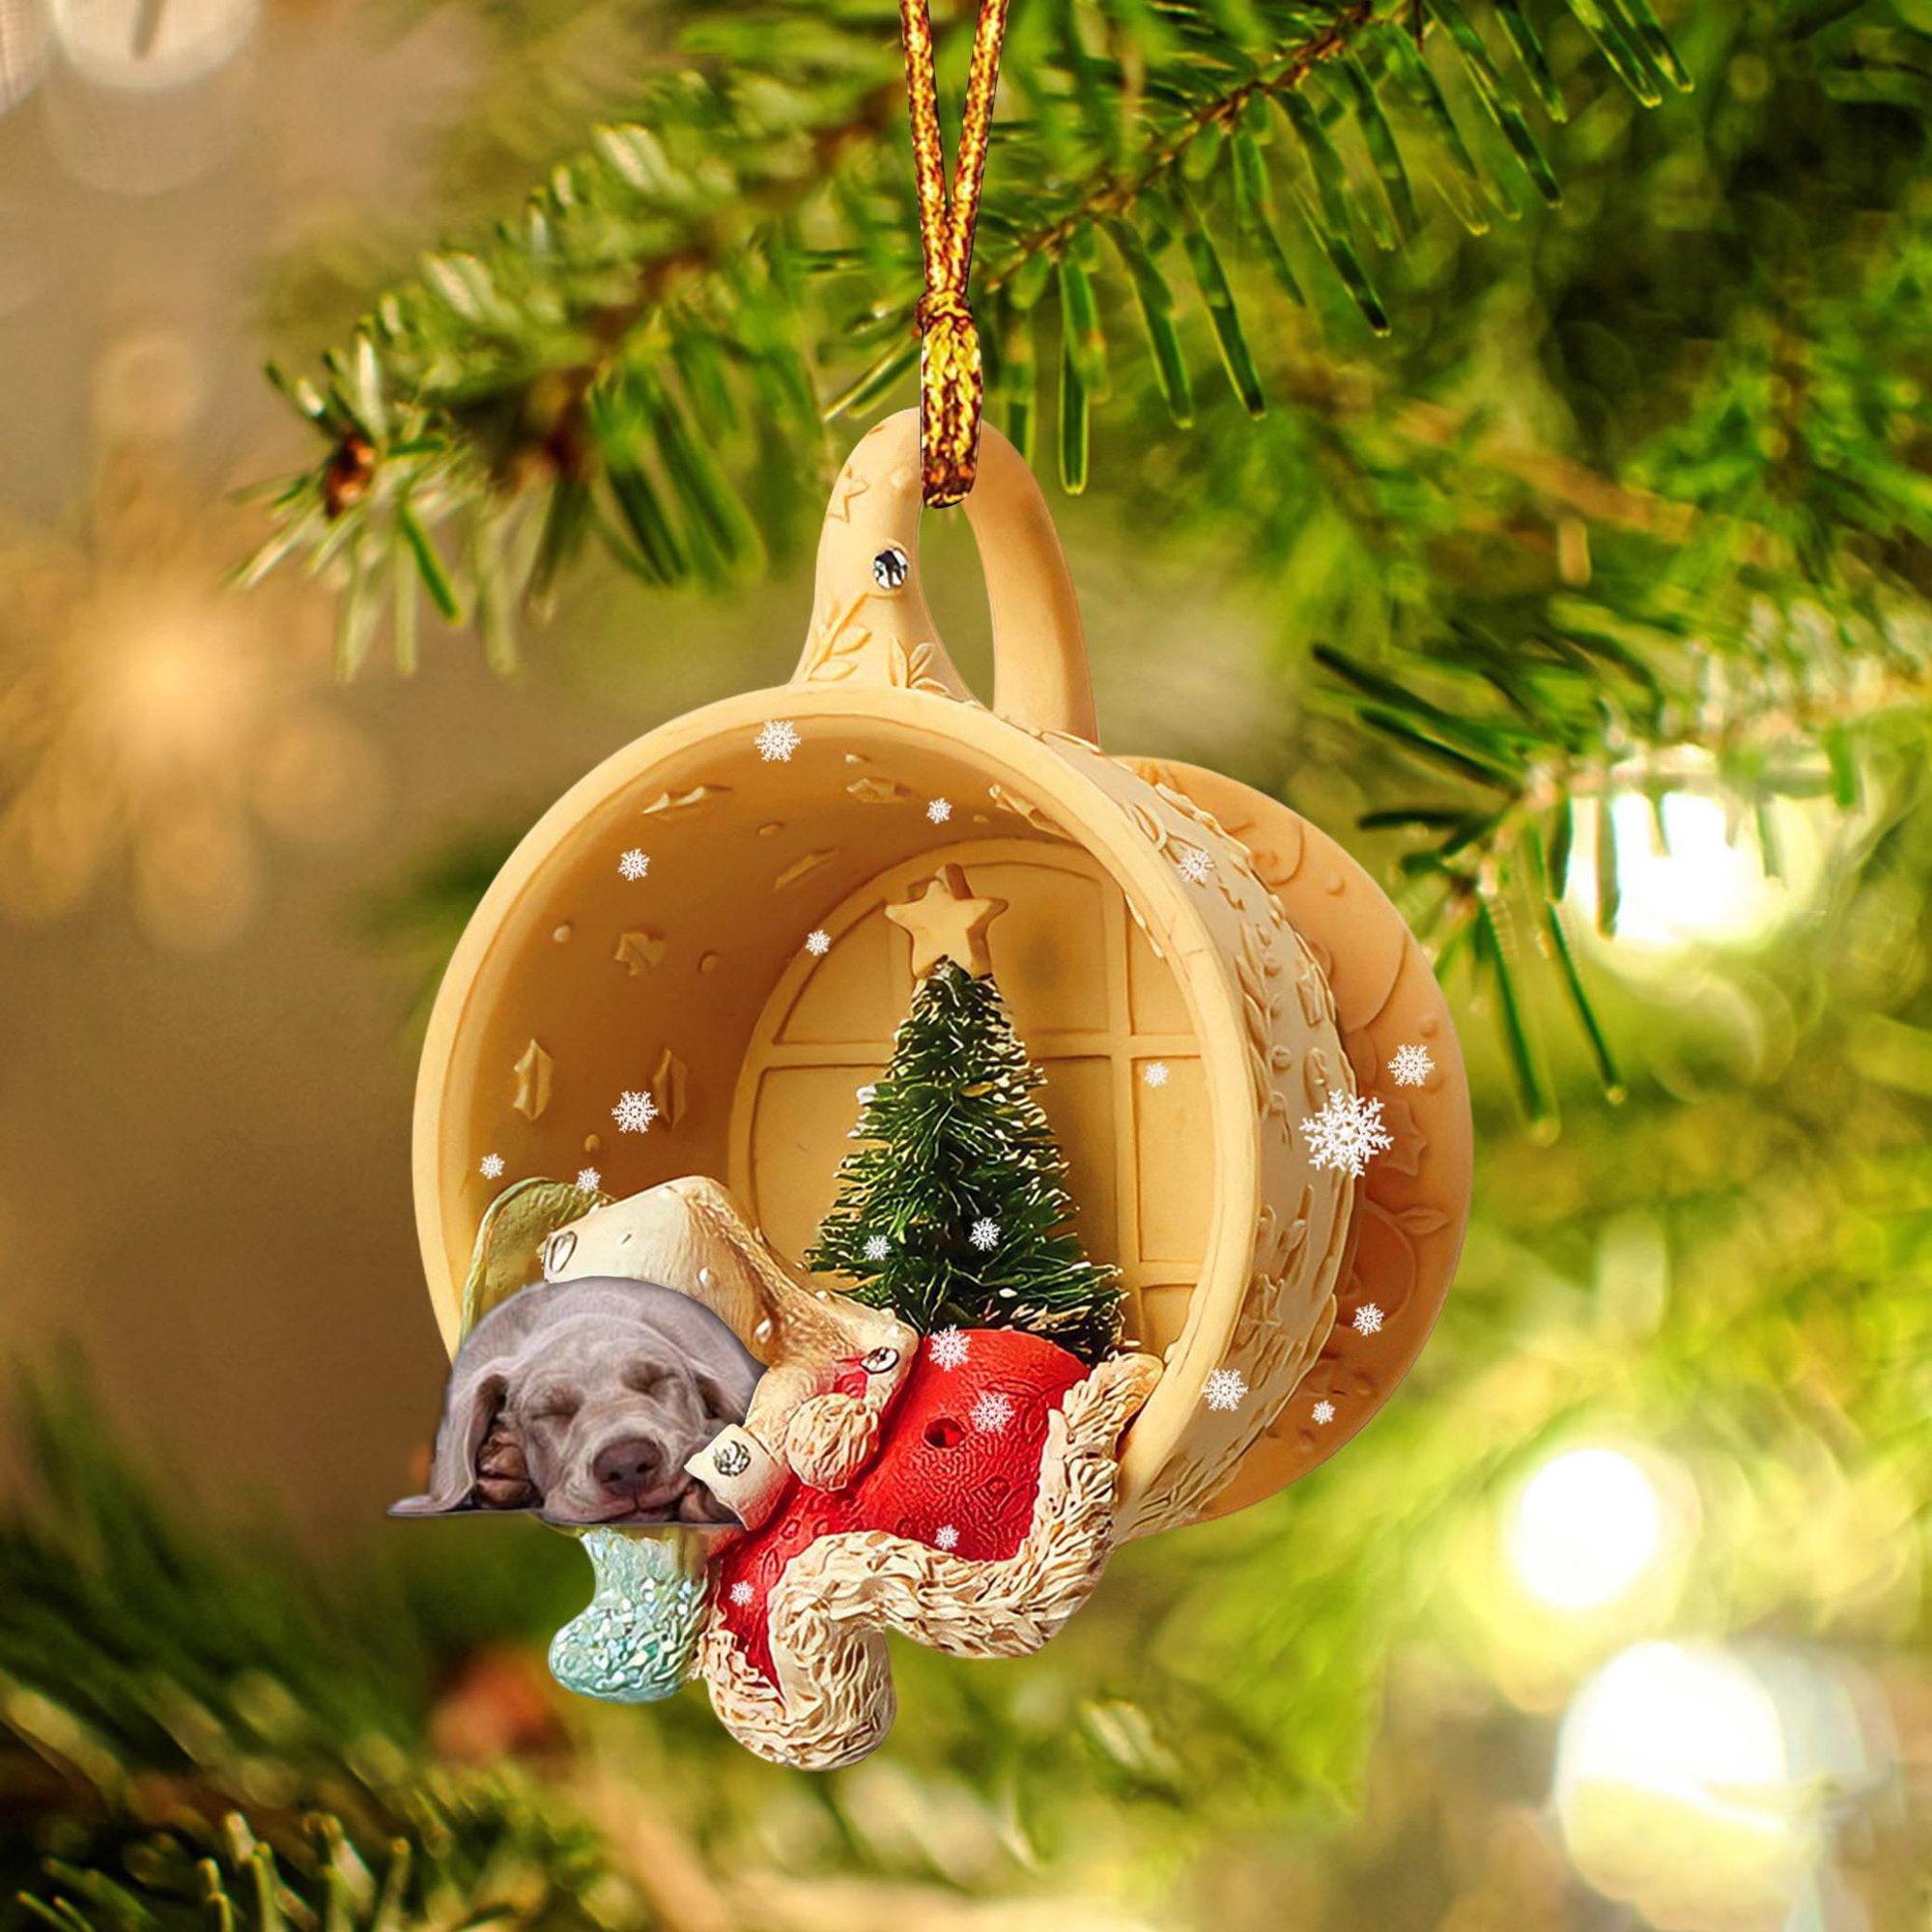 Weimaraner Sleeping In A Cup Christmas Ornament